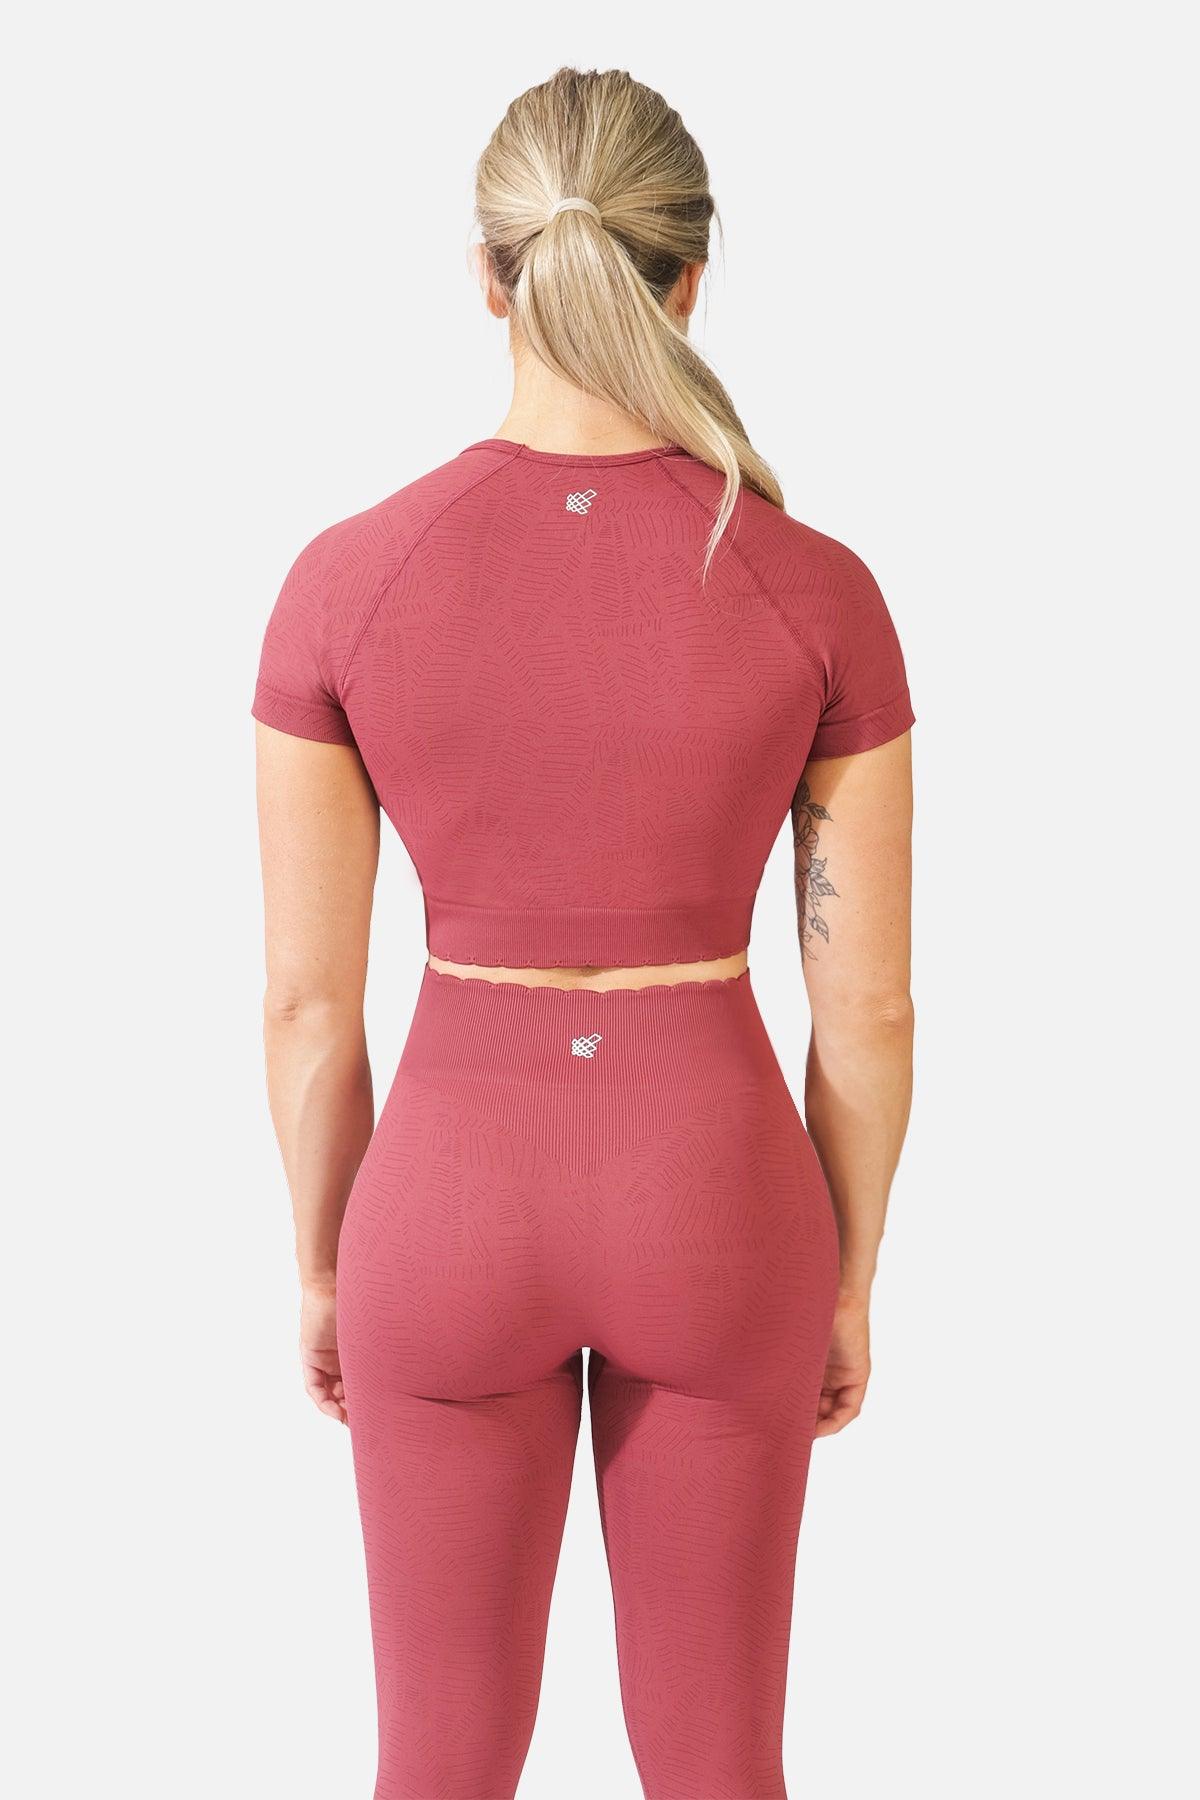 Scallop Hem Leggings - Etched Pink – Jed North Canada